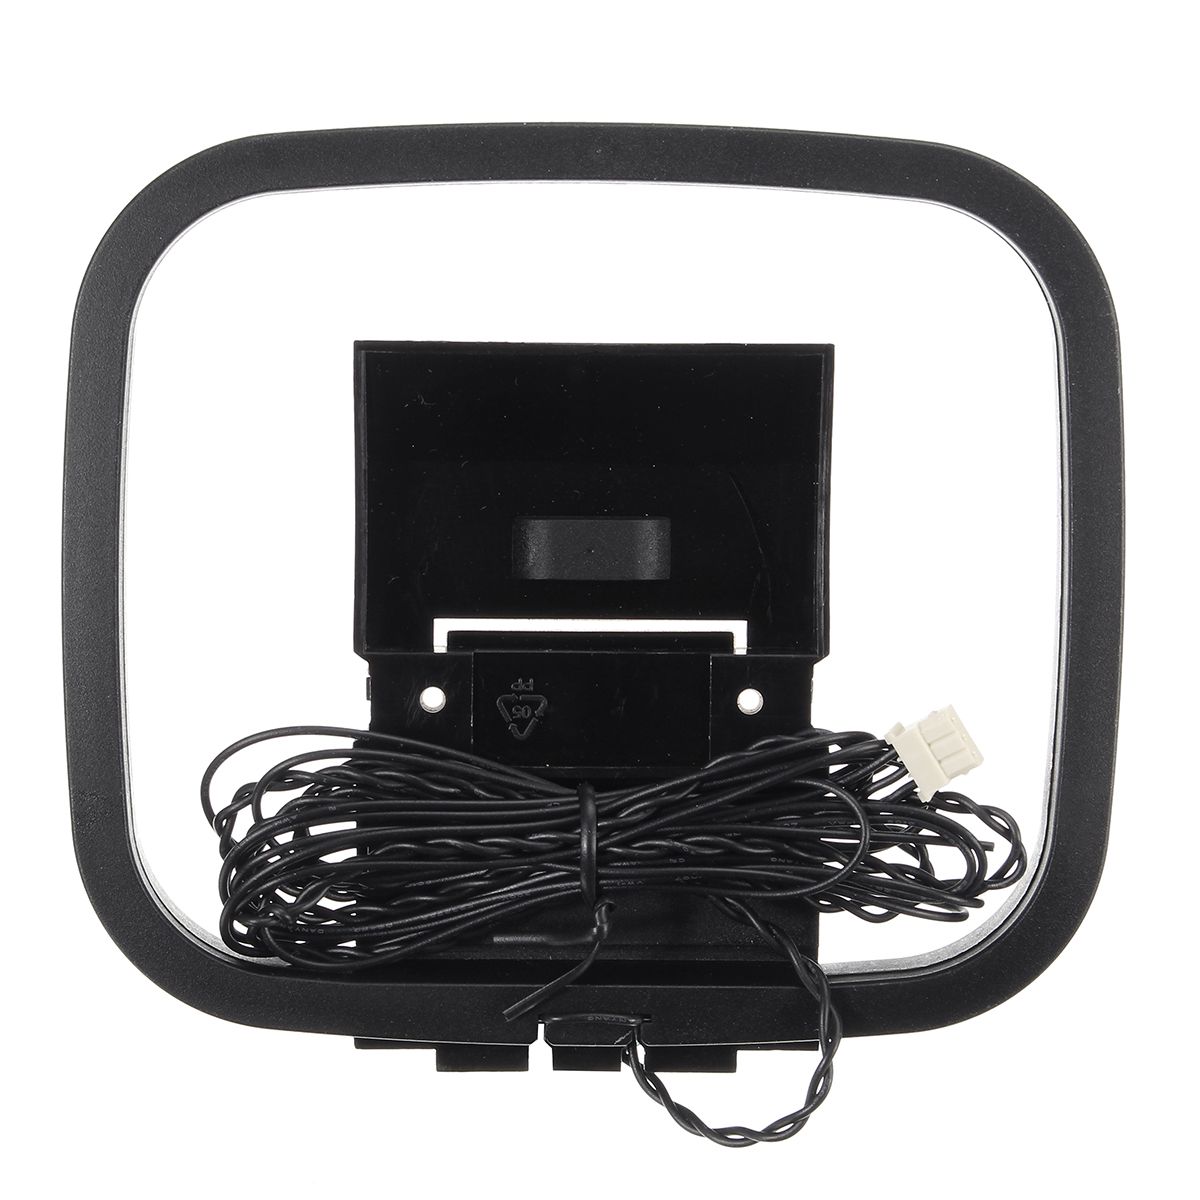 AM-3P-AM-FM-Loop-Antenna-With-3-pin-Mini-Connector-For-Home-Audio-Theater-Systems-Amplifier-1290066